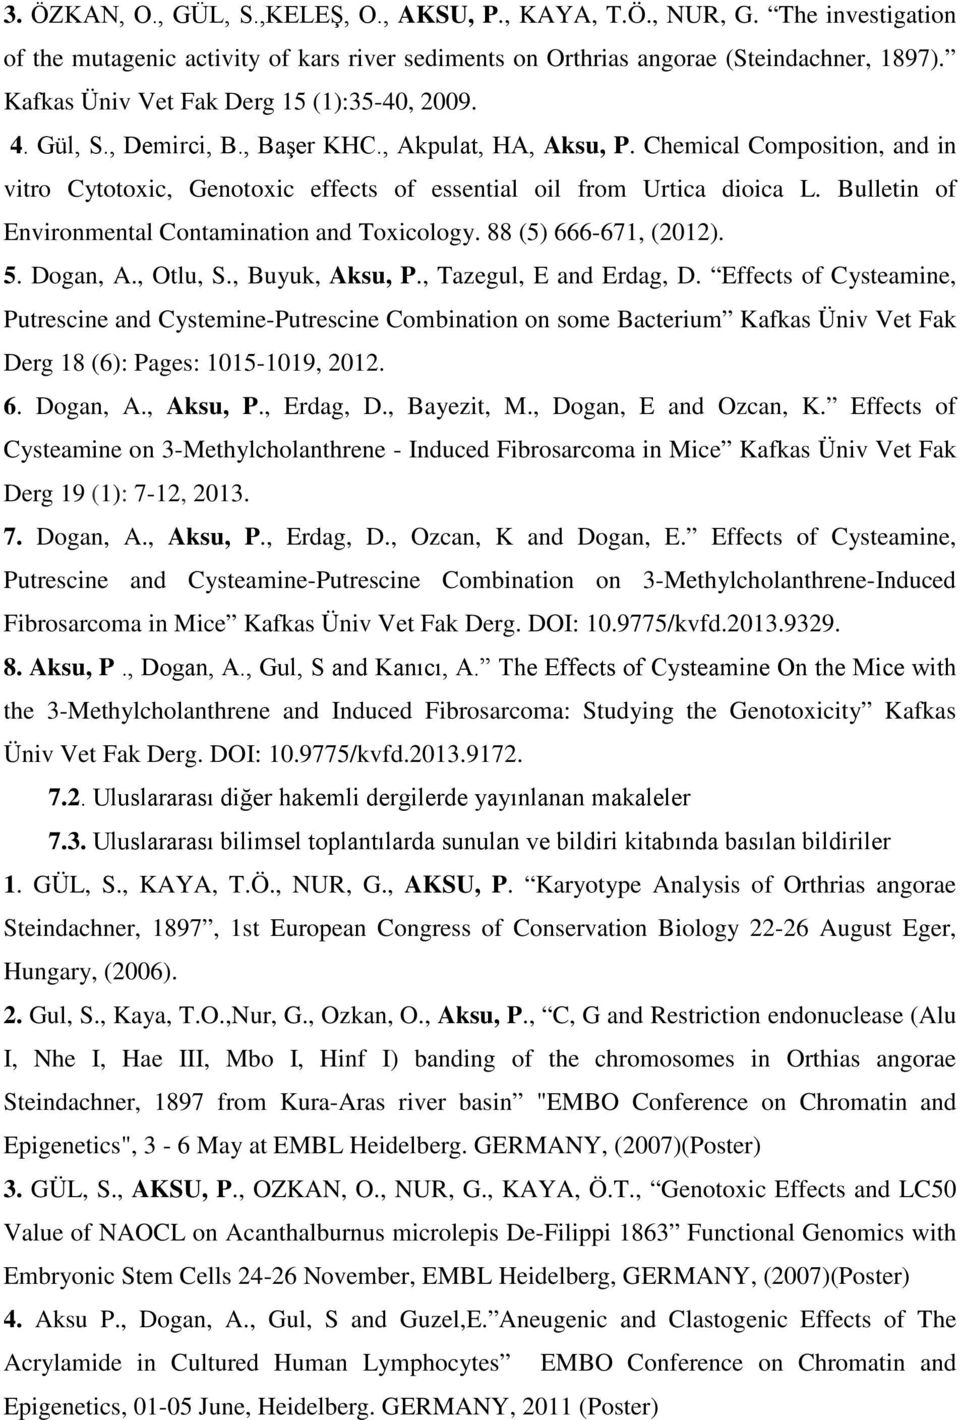 Chemical Composition, and in vitro Cytotoxic, Genotoxic effects of essential oil from Urtica dioica L. Bulletin of Environmental Contamination and Toxicology. 88 (5) 666-671, (2012). 5. Dogan, A.